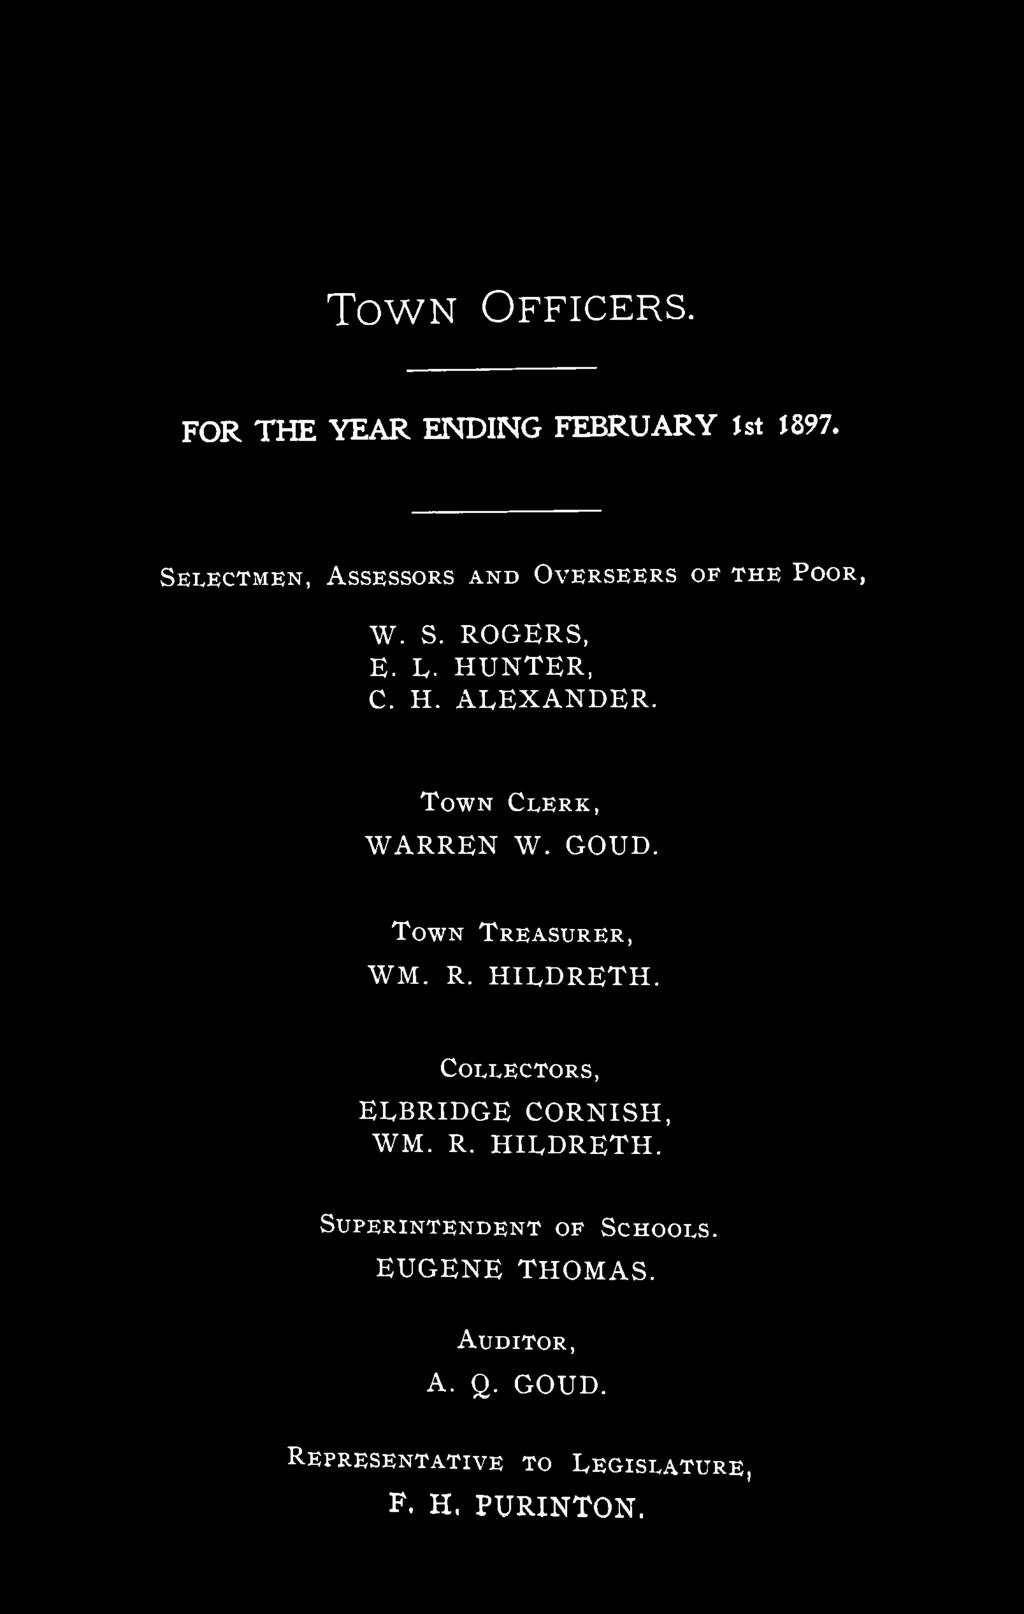 TOWN OFFICERS. FOR THE YEAR ENDING FEBRUARY 1st 1897. SELECTMEN, ASSESSORS AND OVERSEERS OF THE POOR, W. S. ROGERS, E. L. HUNTER, C. H. ALEXANDER. TOWN CLERK, WARREN W. GOUD.